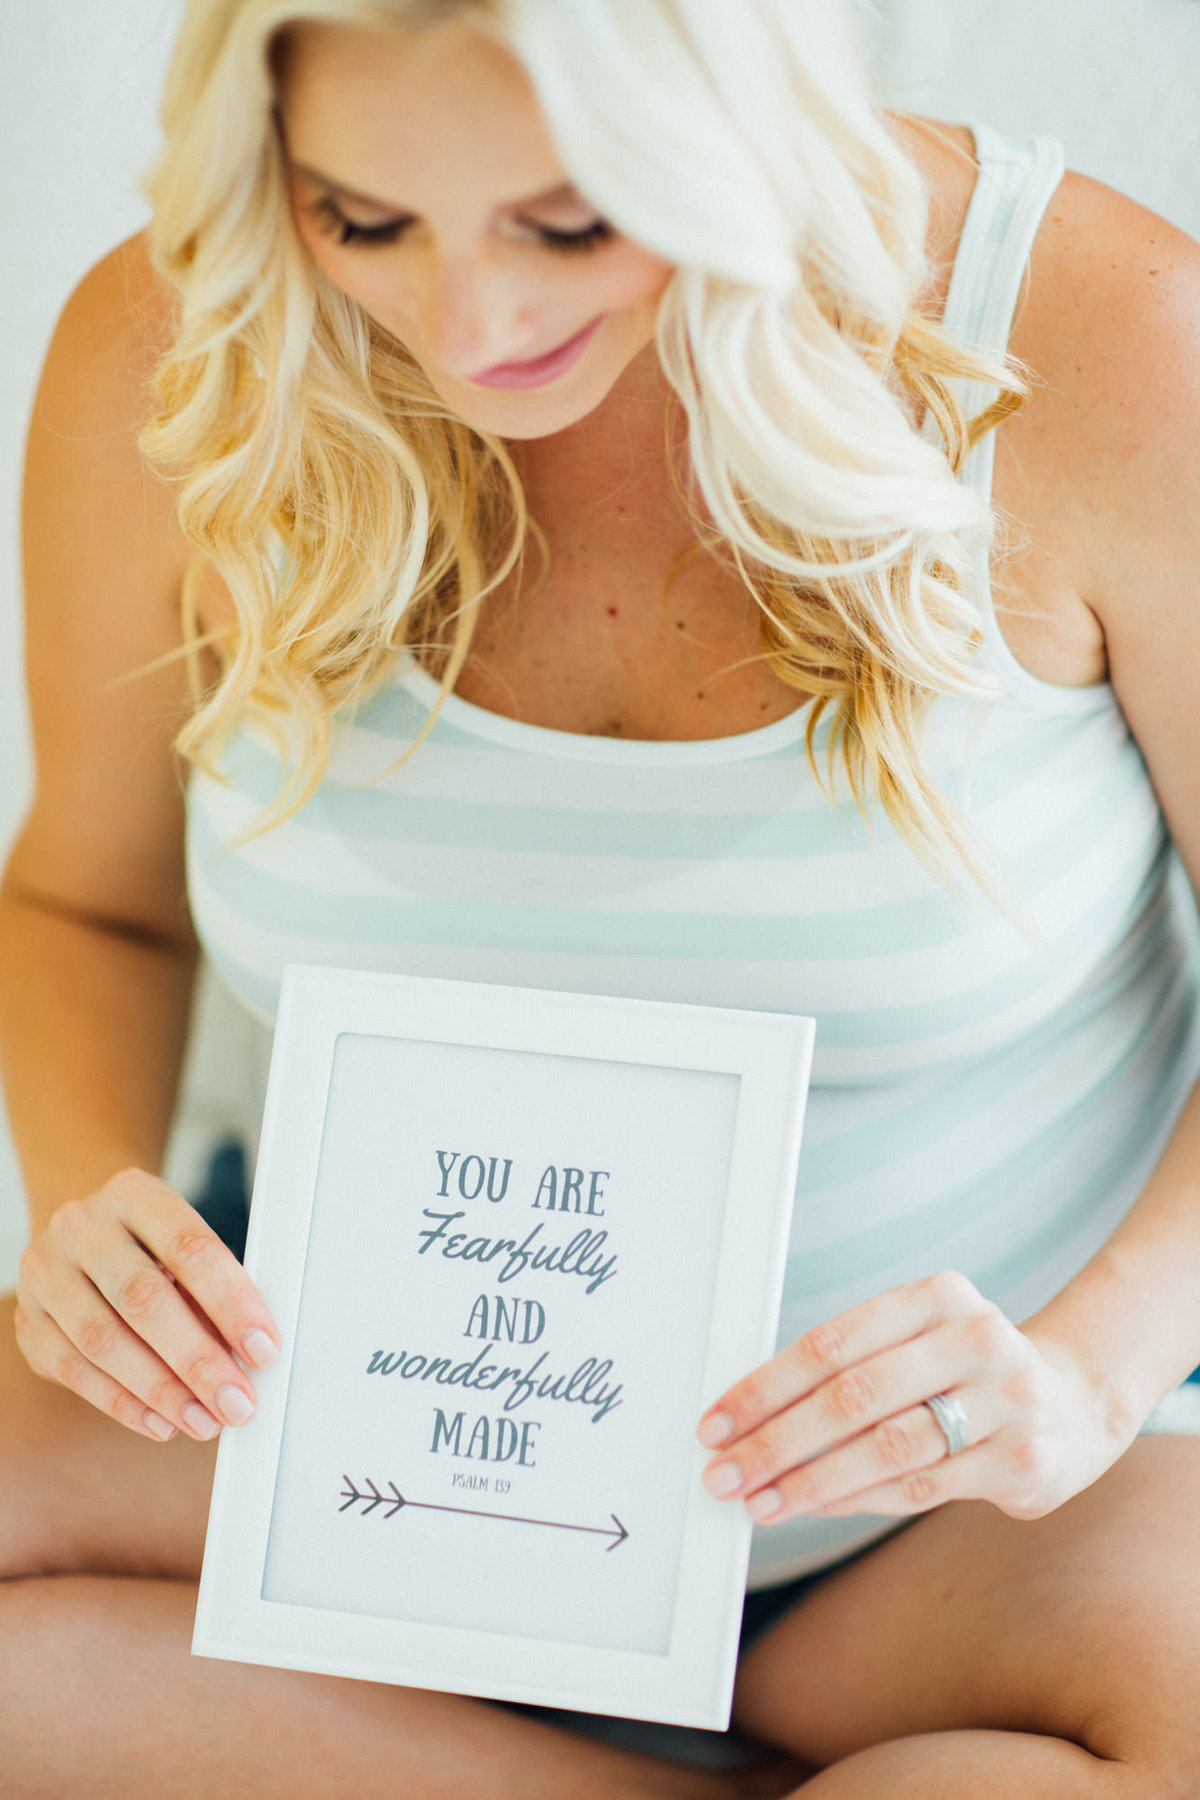 Mom to be holds a sign up during a maternity photo shoot so her child will read it in the future